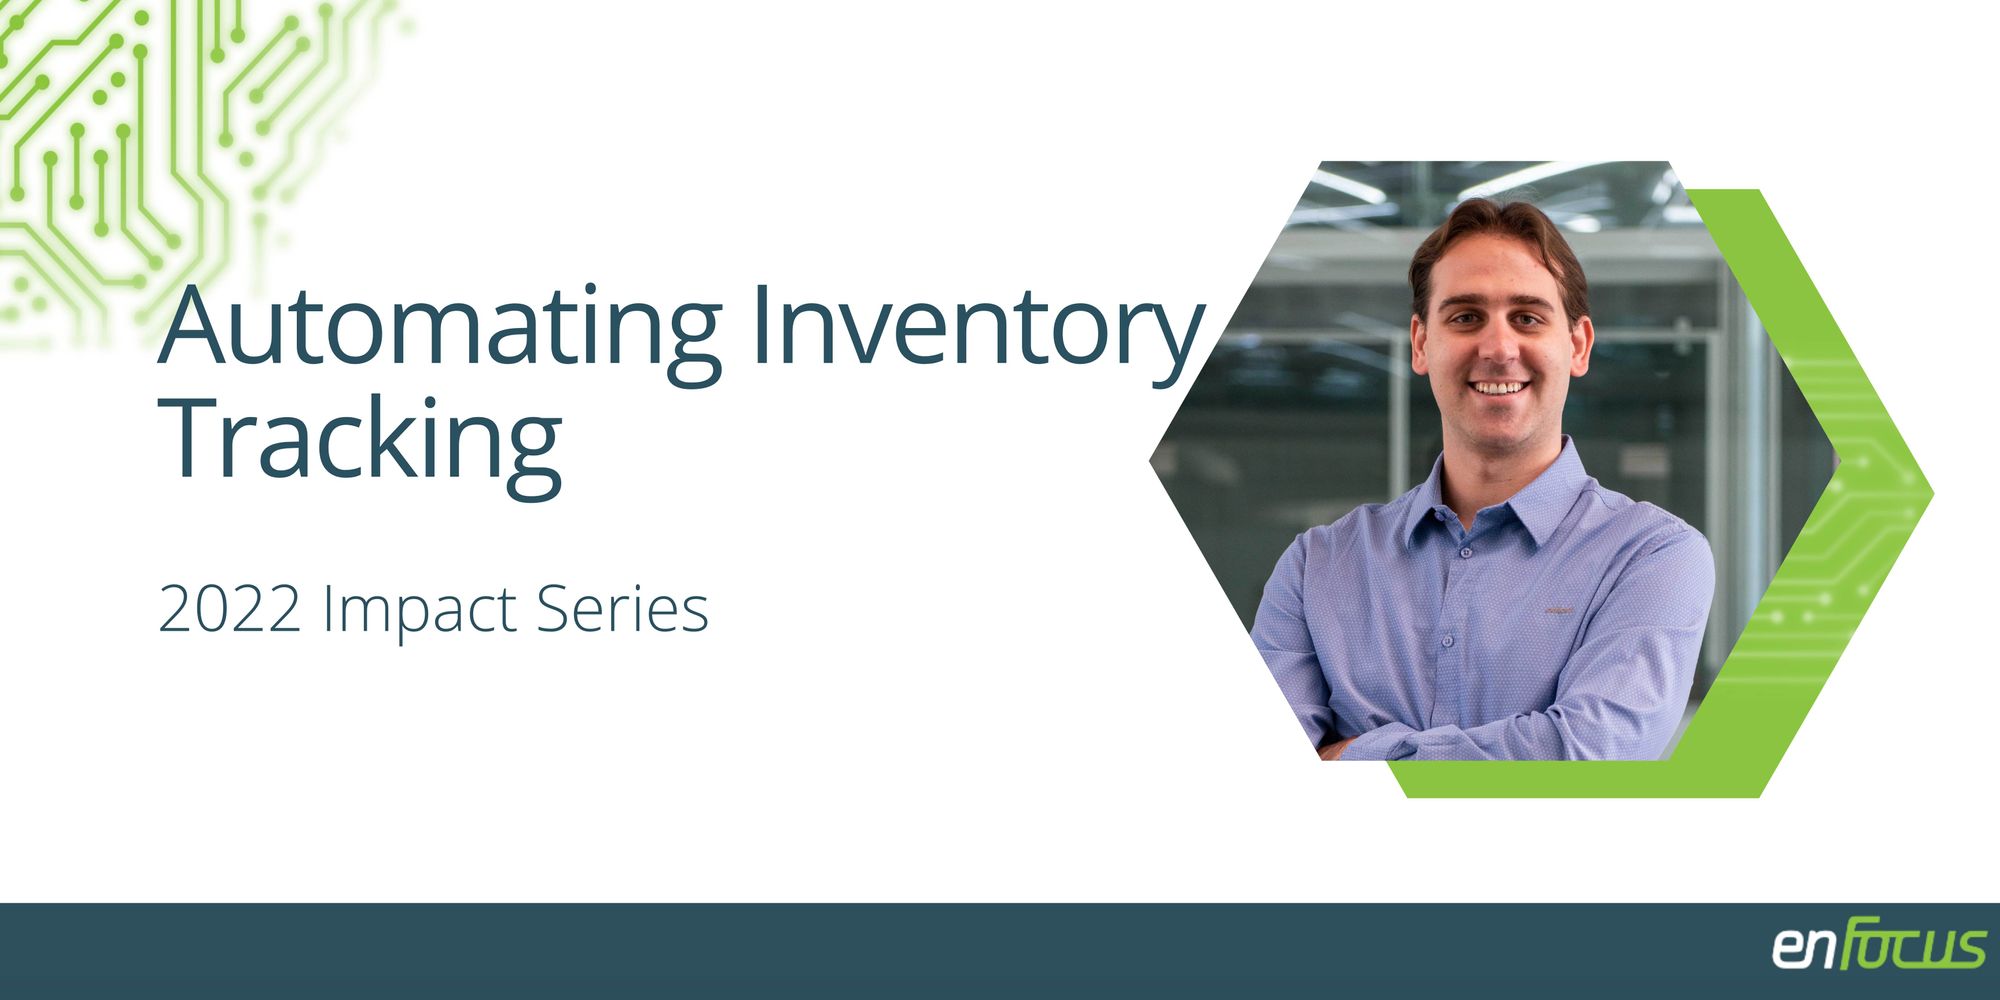 Diogo Poubel Batista Helps Automate Inventory Tracking